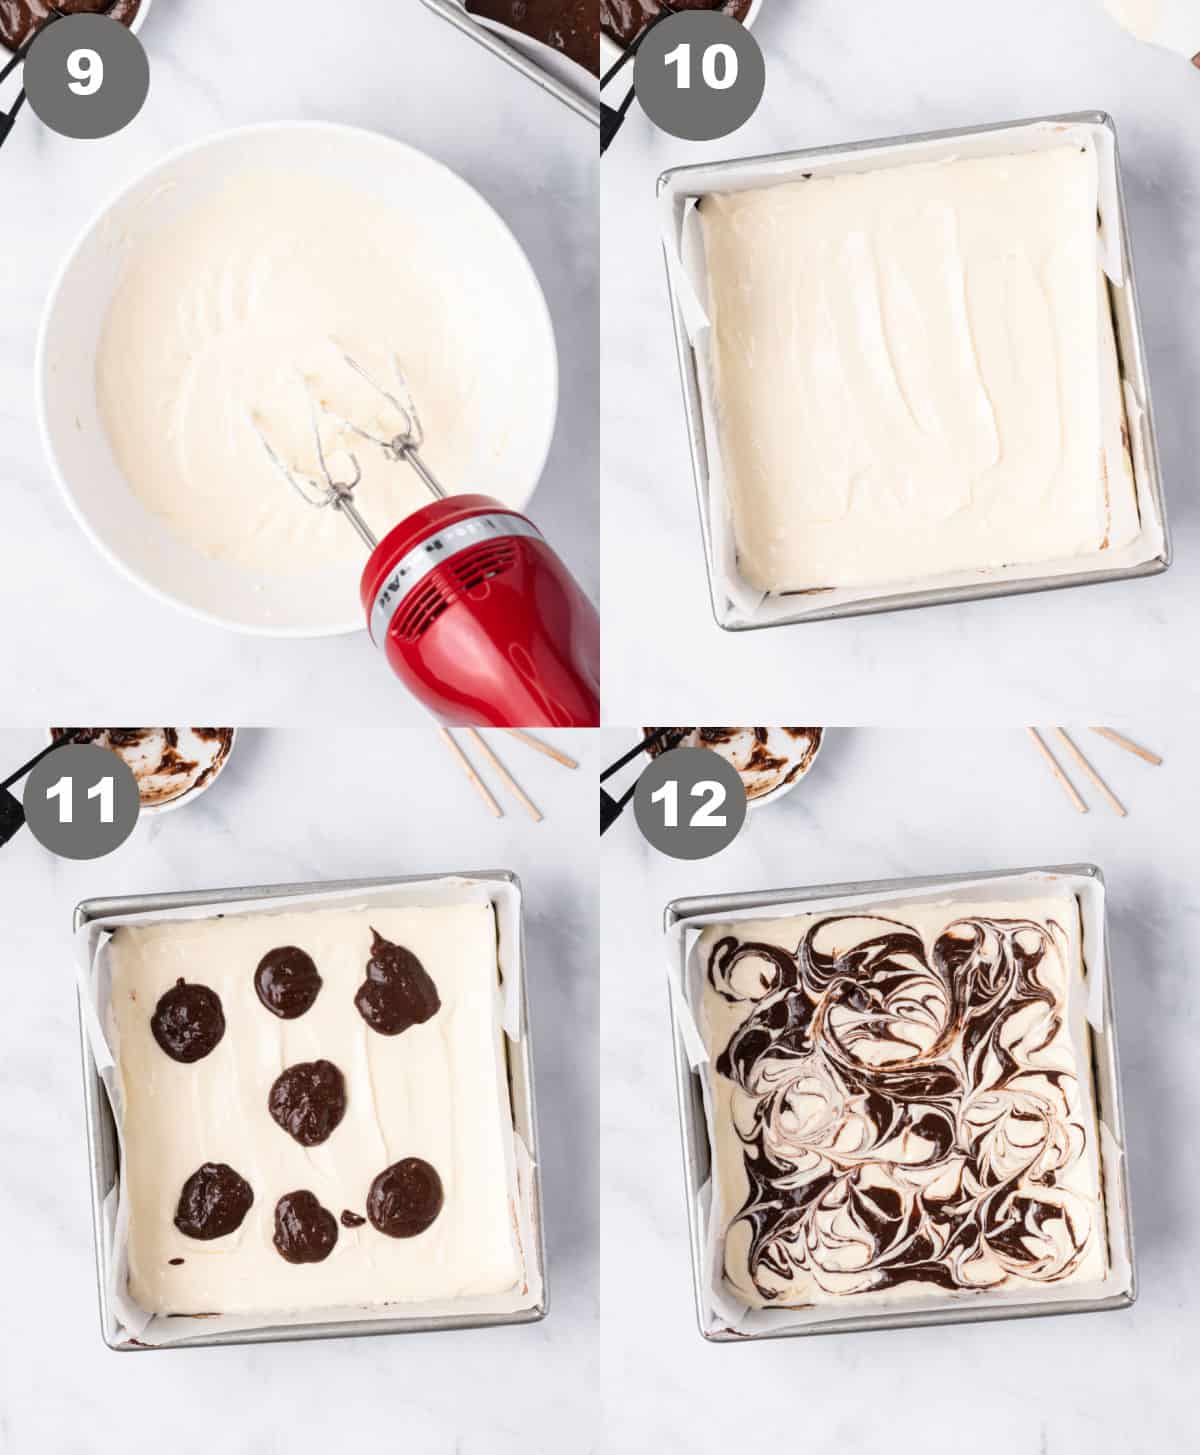 Creamcheese mixture spread on top and brownie batter swirled in.